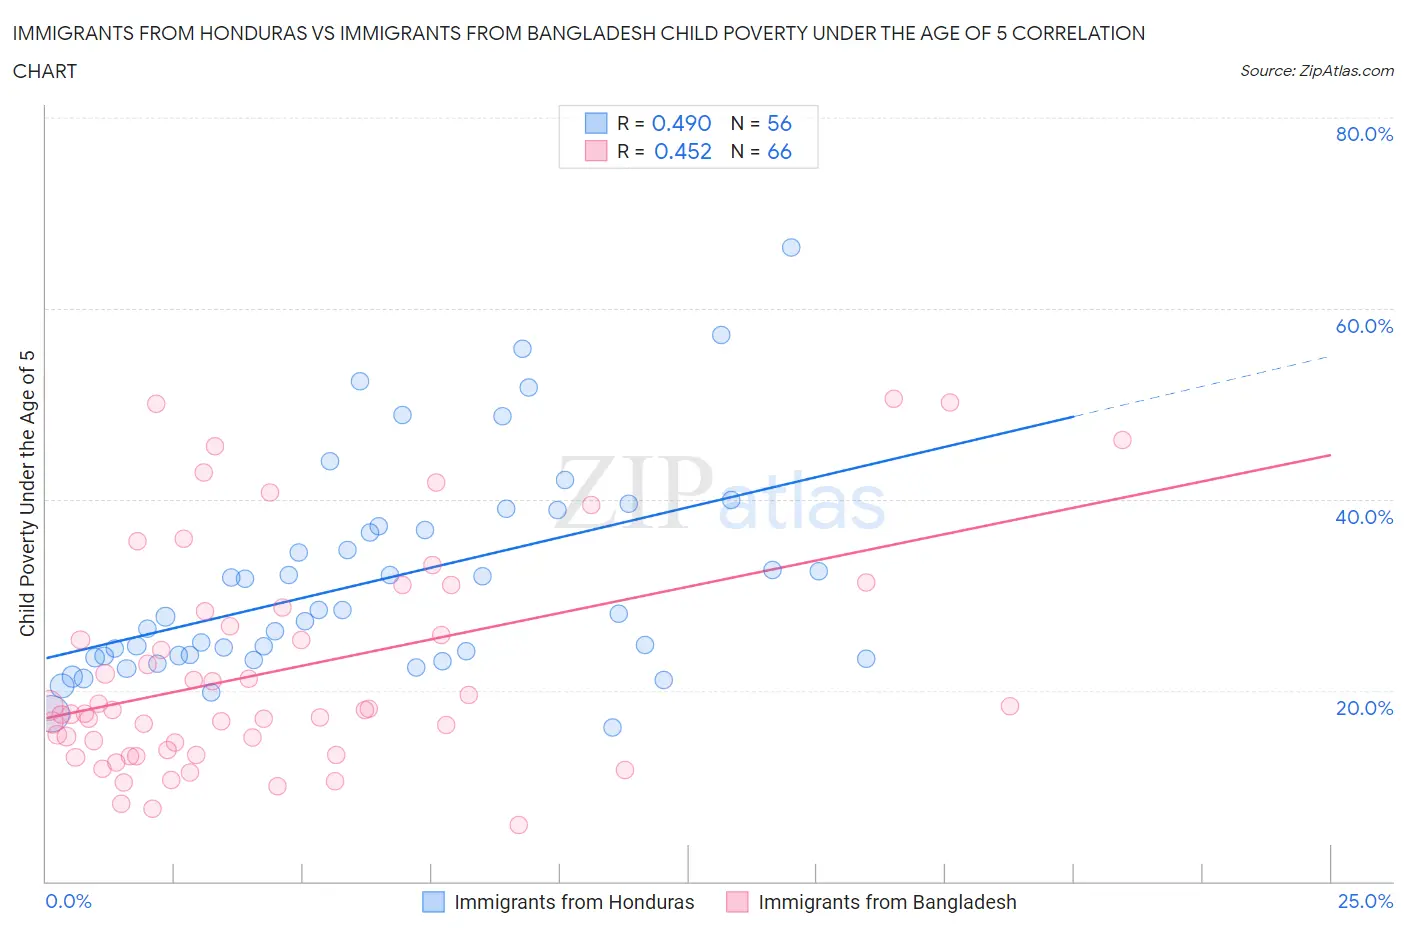 Immigrants from Honduras vs Immigrants from Bangladesh Child Poverty Under the Age of 5